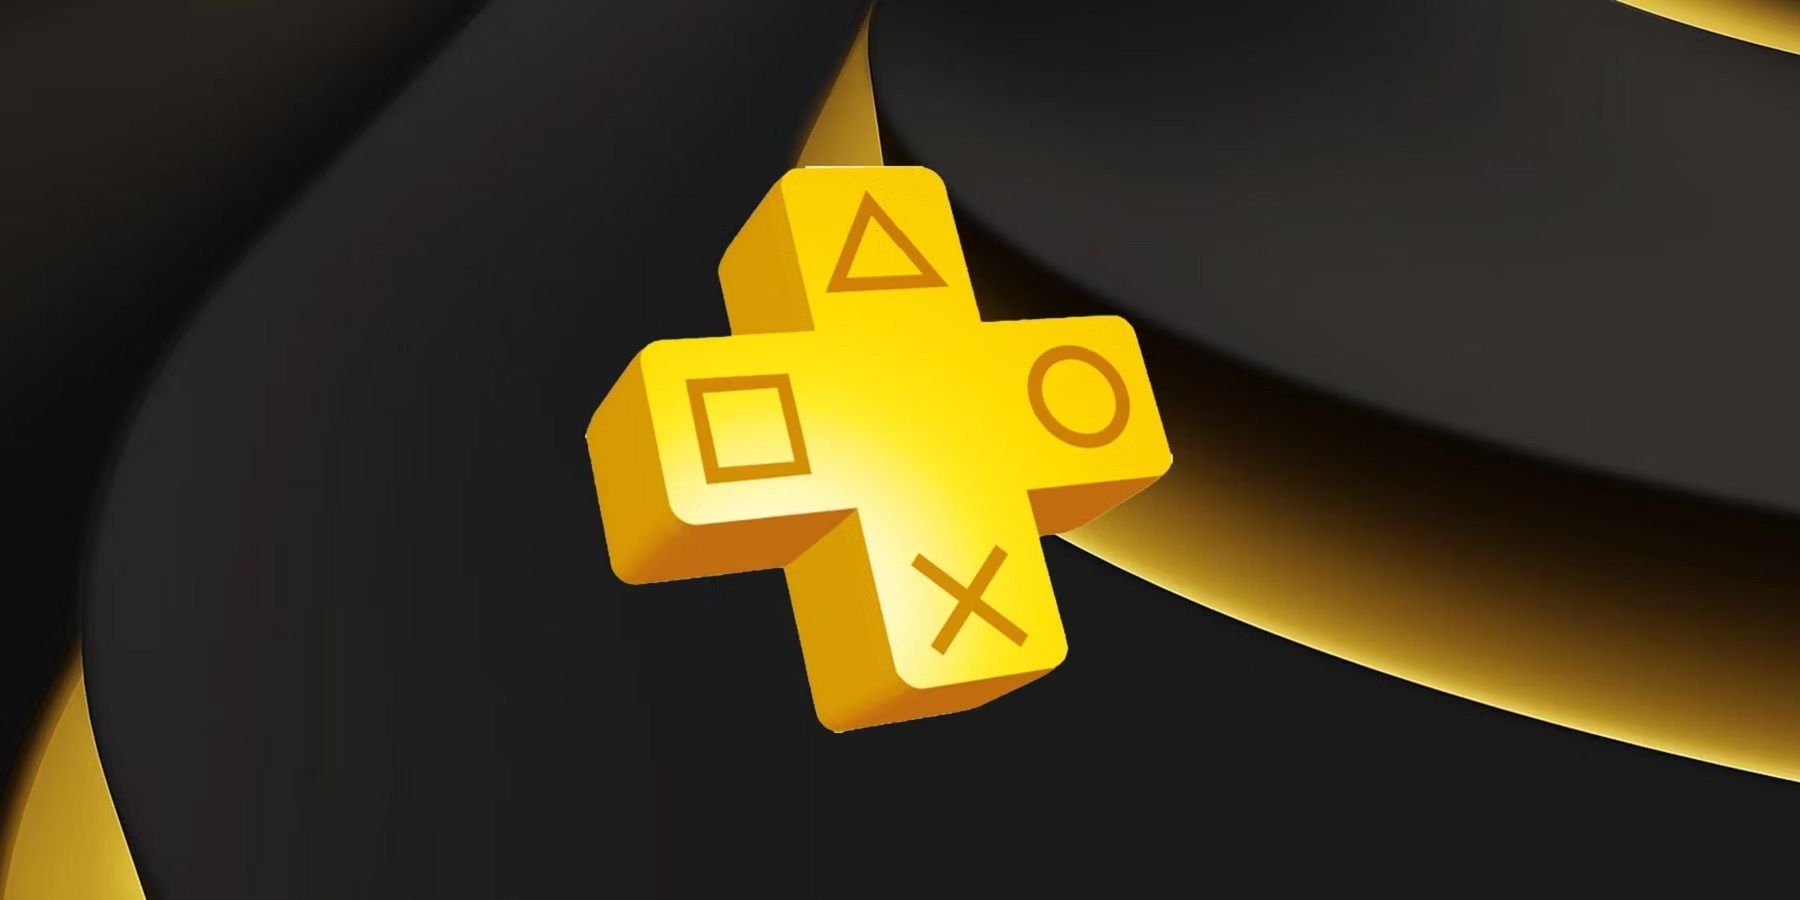 ps plus logo with black background